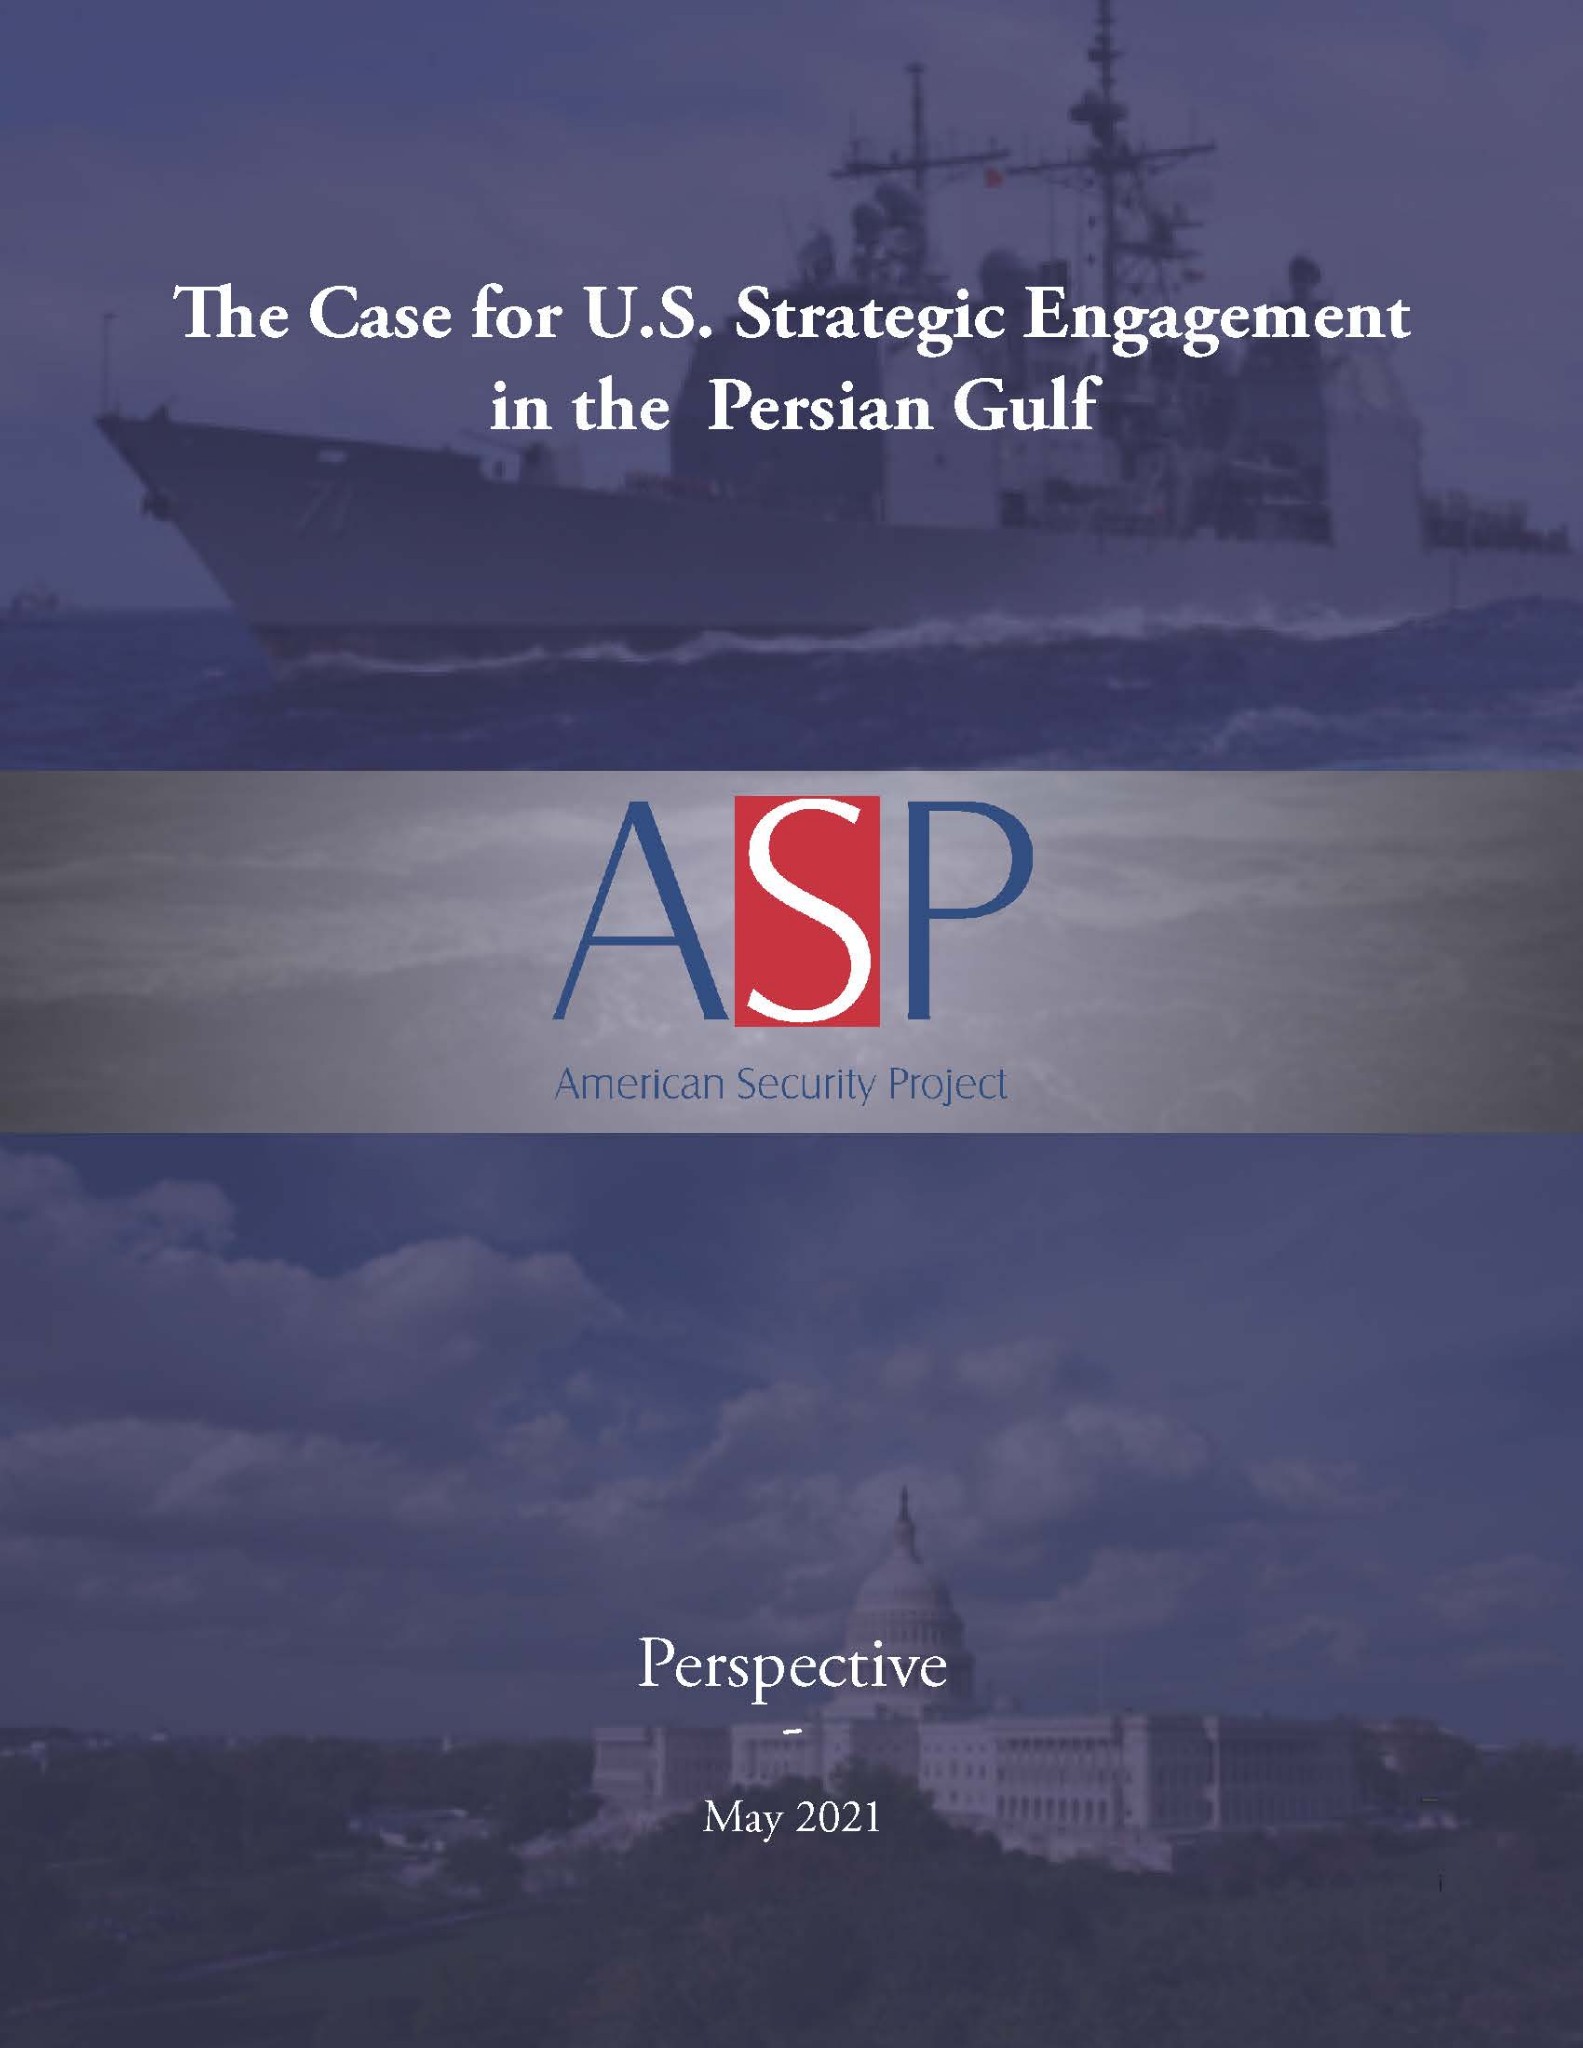 Perspective – The Case for U.S. Strategic Engagement in the Persian Gulf